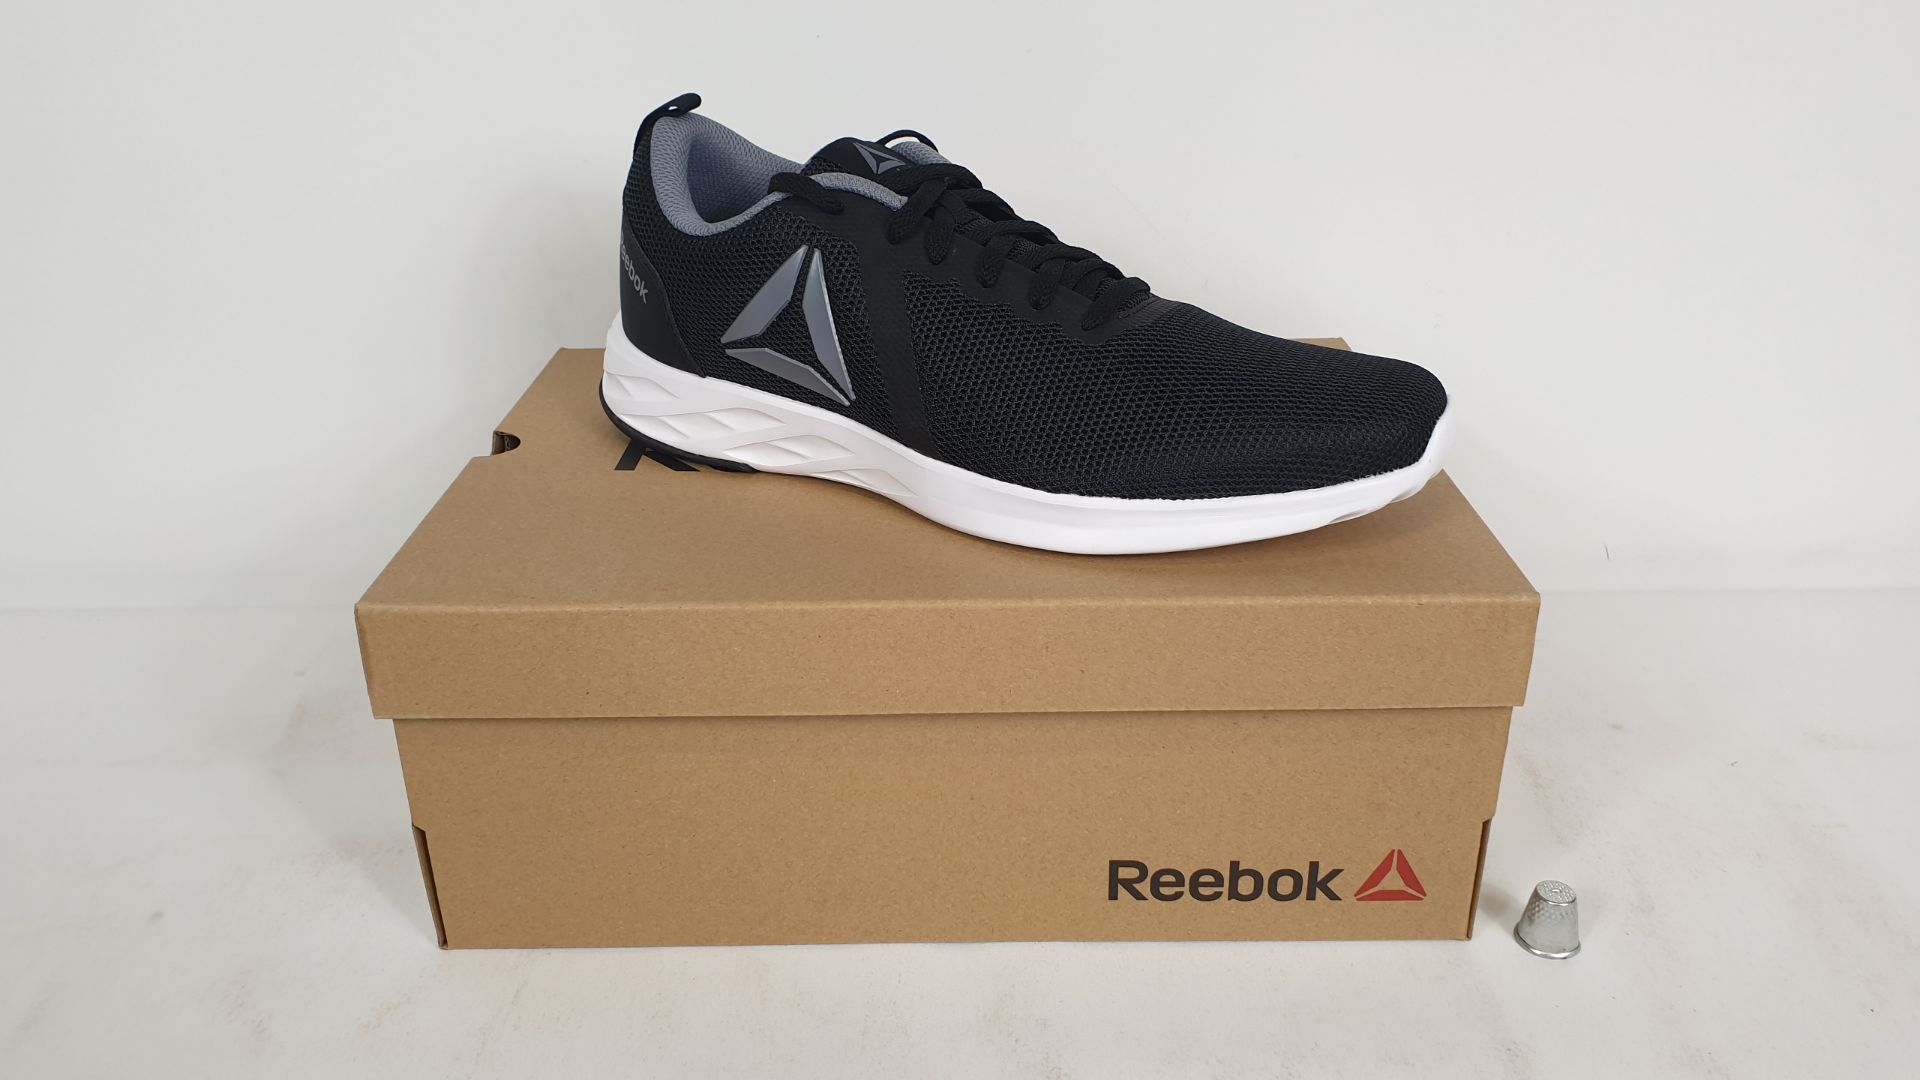 6 X PAIRS OF REEBOK TRAINERS ASTRO RIDE ESSENTIAL BLACK/ WHITE SIZE 9 - BRAND NEW AND BOXED